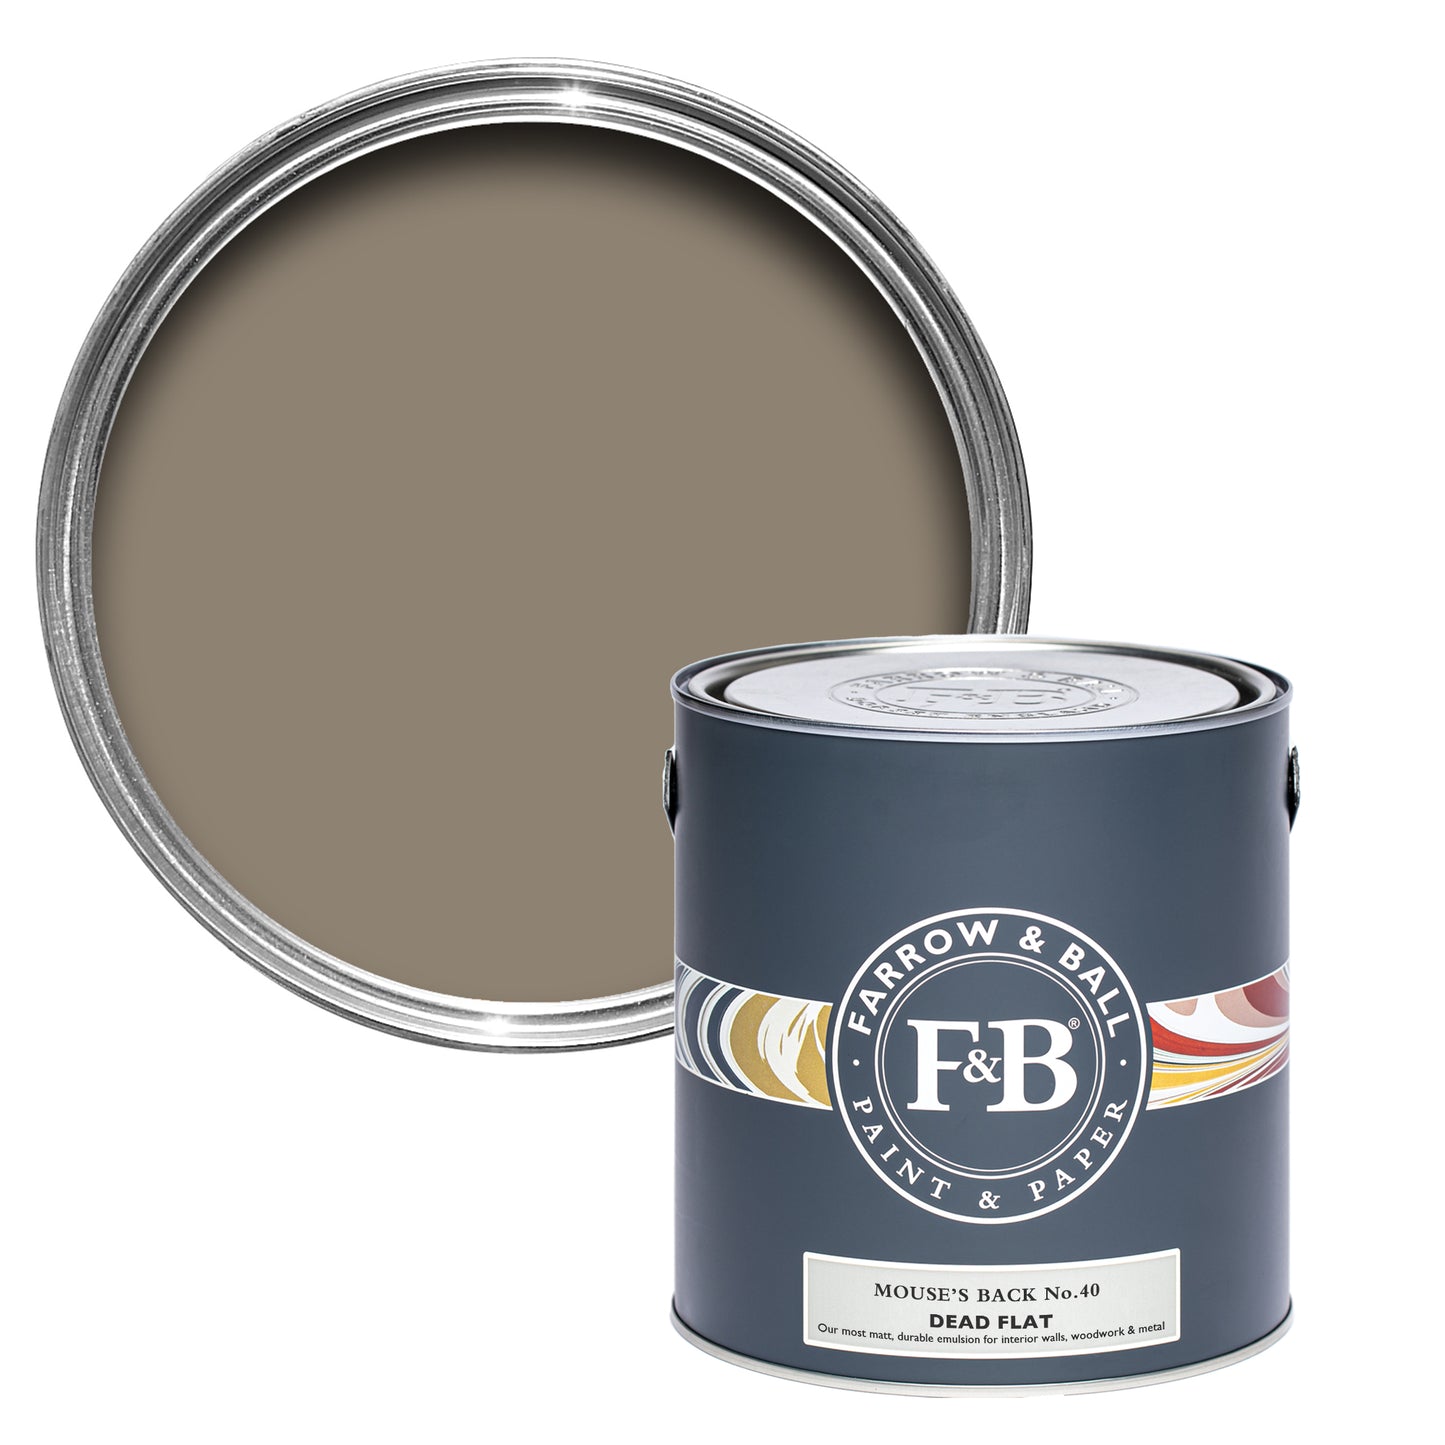 Dead Flat - Farrow and Ball - Mouse's Back 40 - Allround